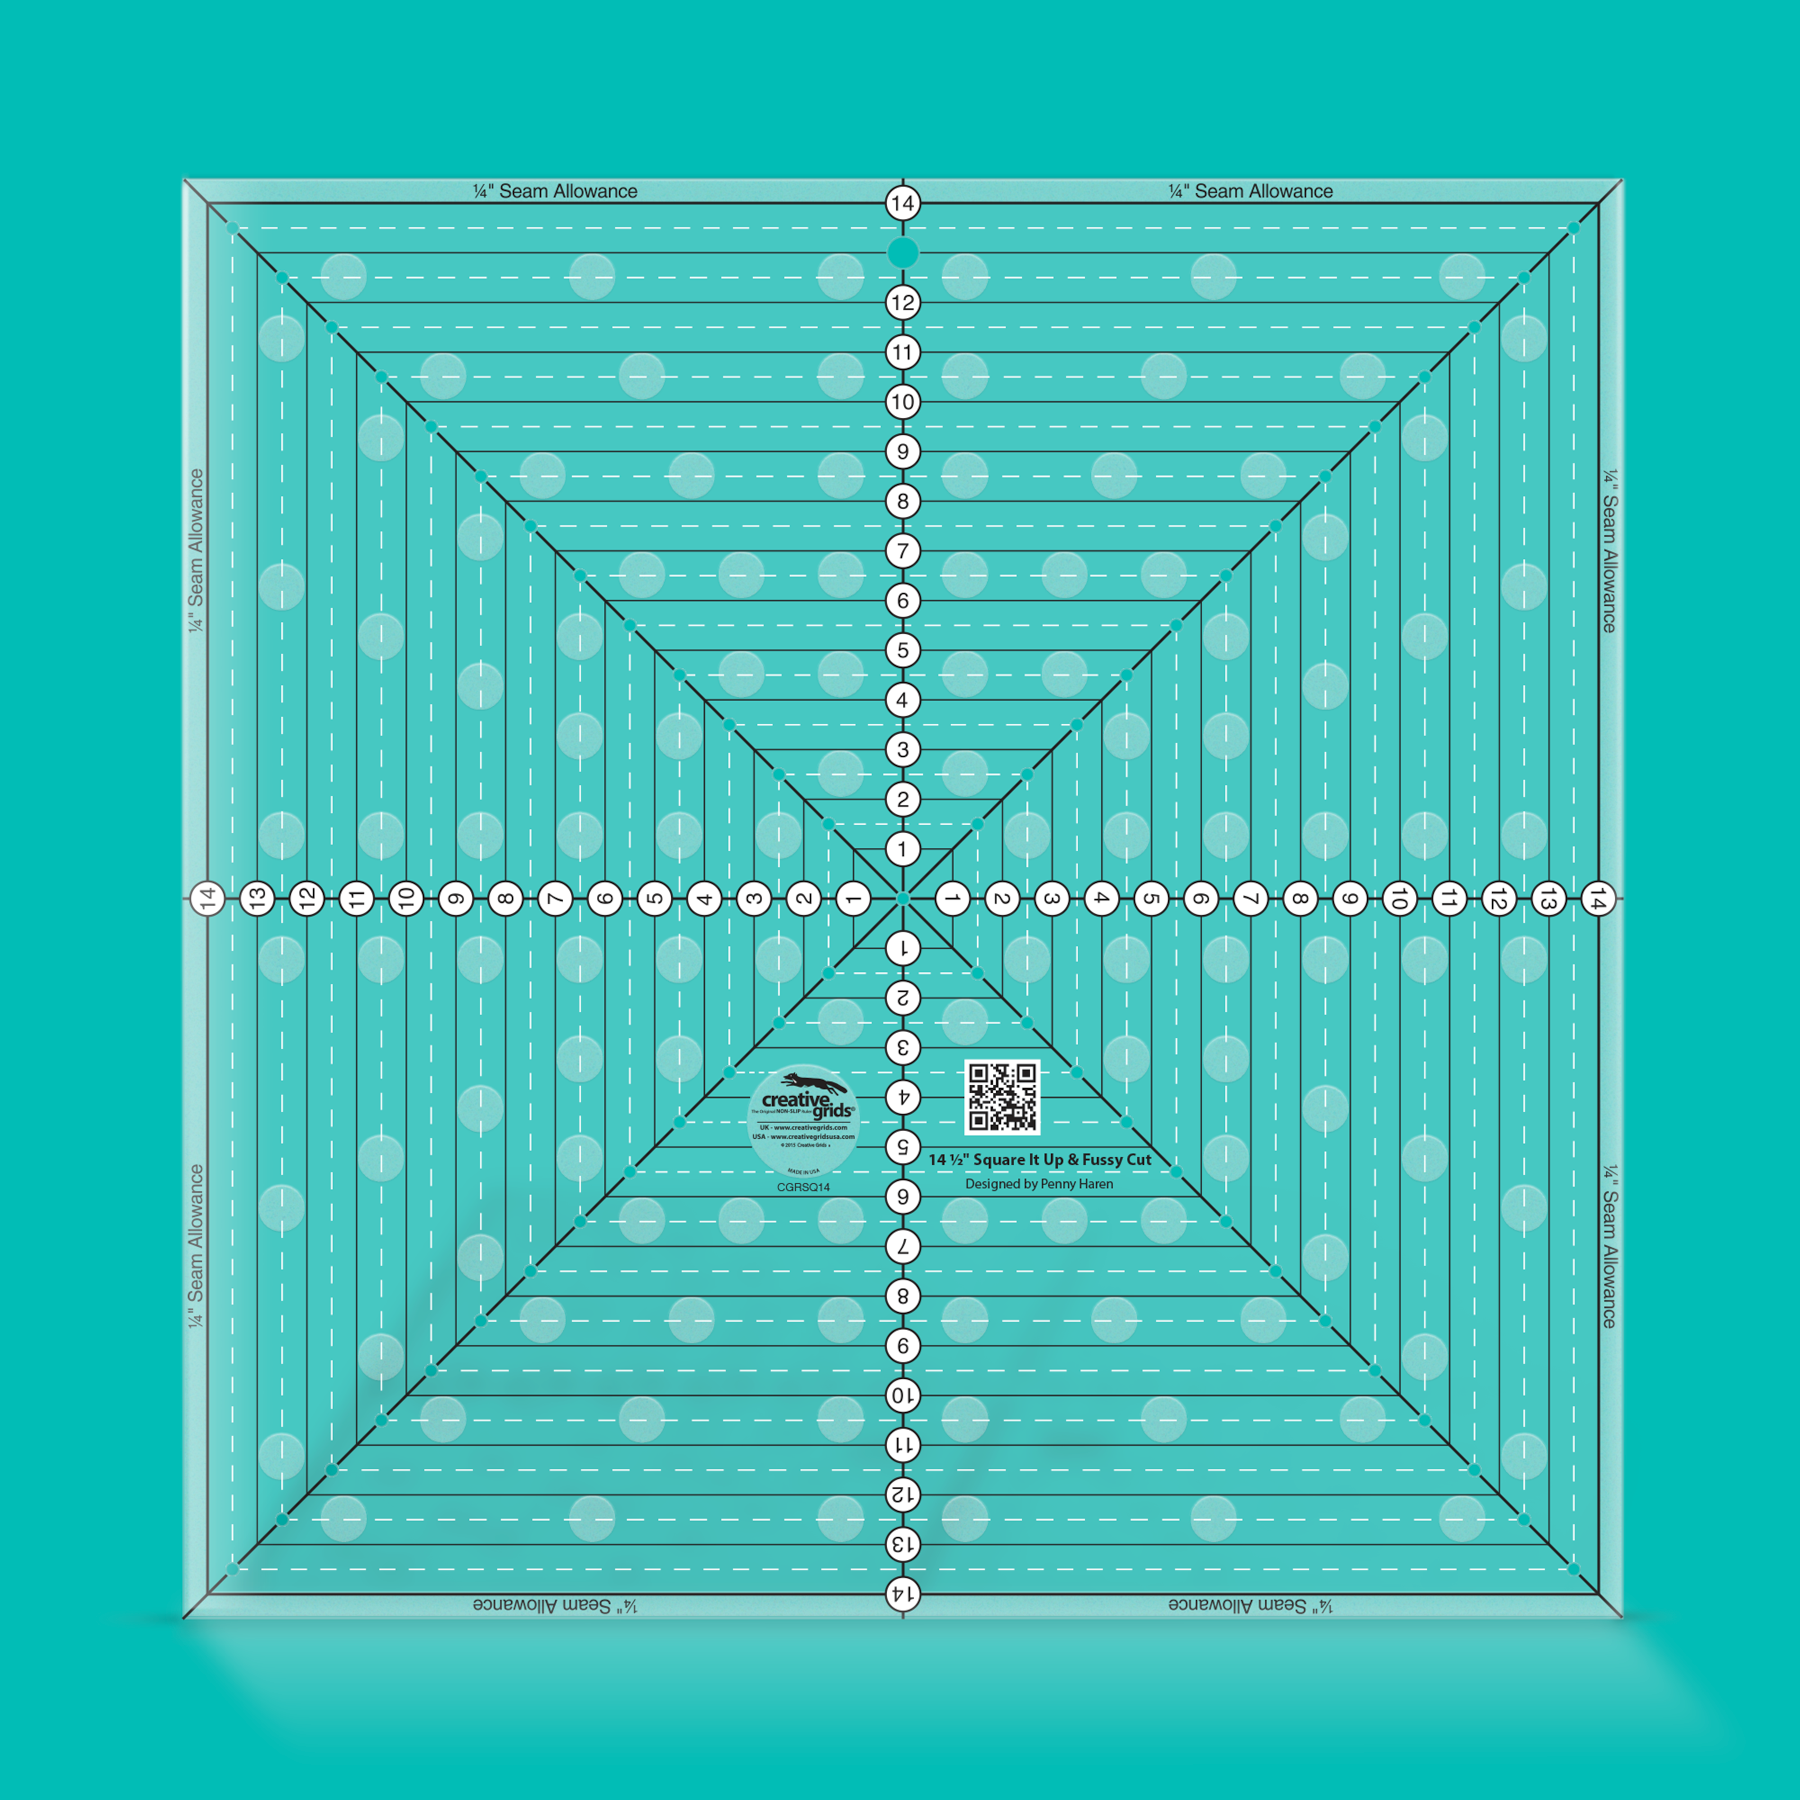 Creative Grids 14 1/2 Square It Up or Fussy Cut Square Sewing & Quilting  Ruler